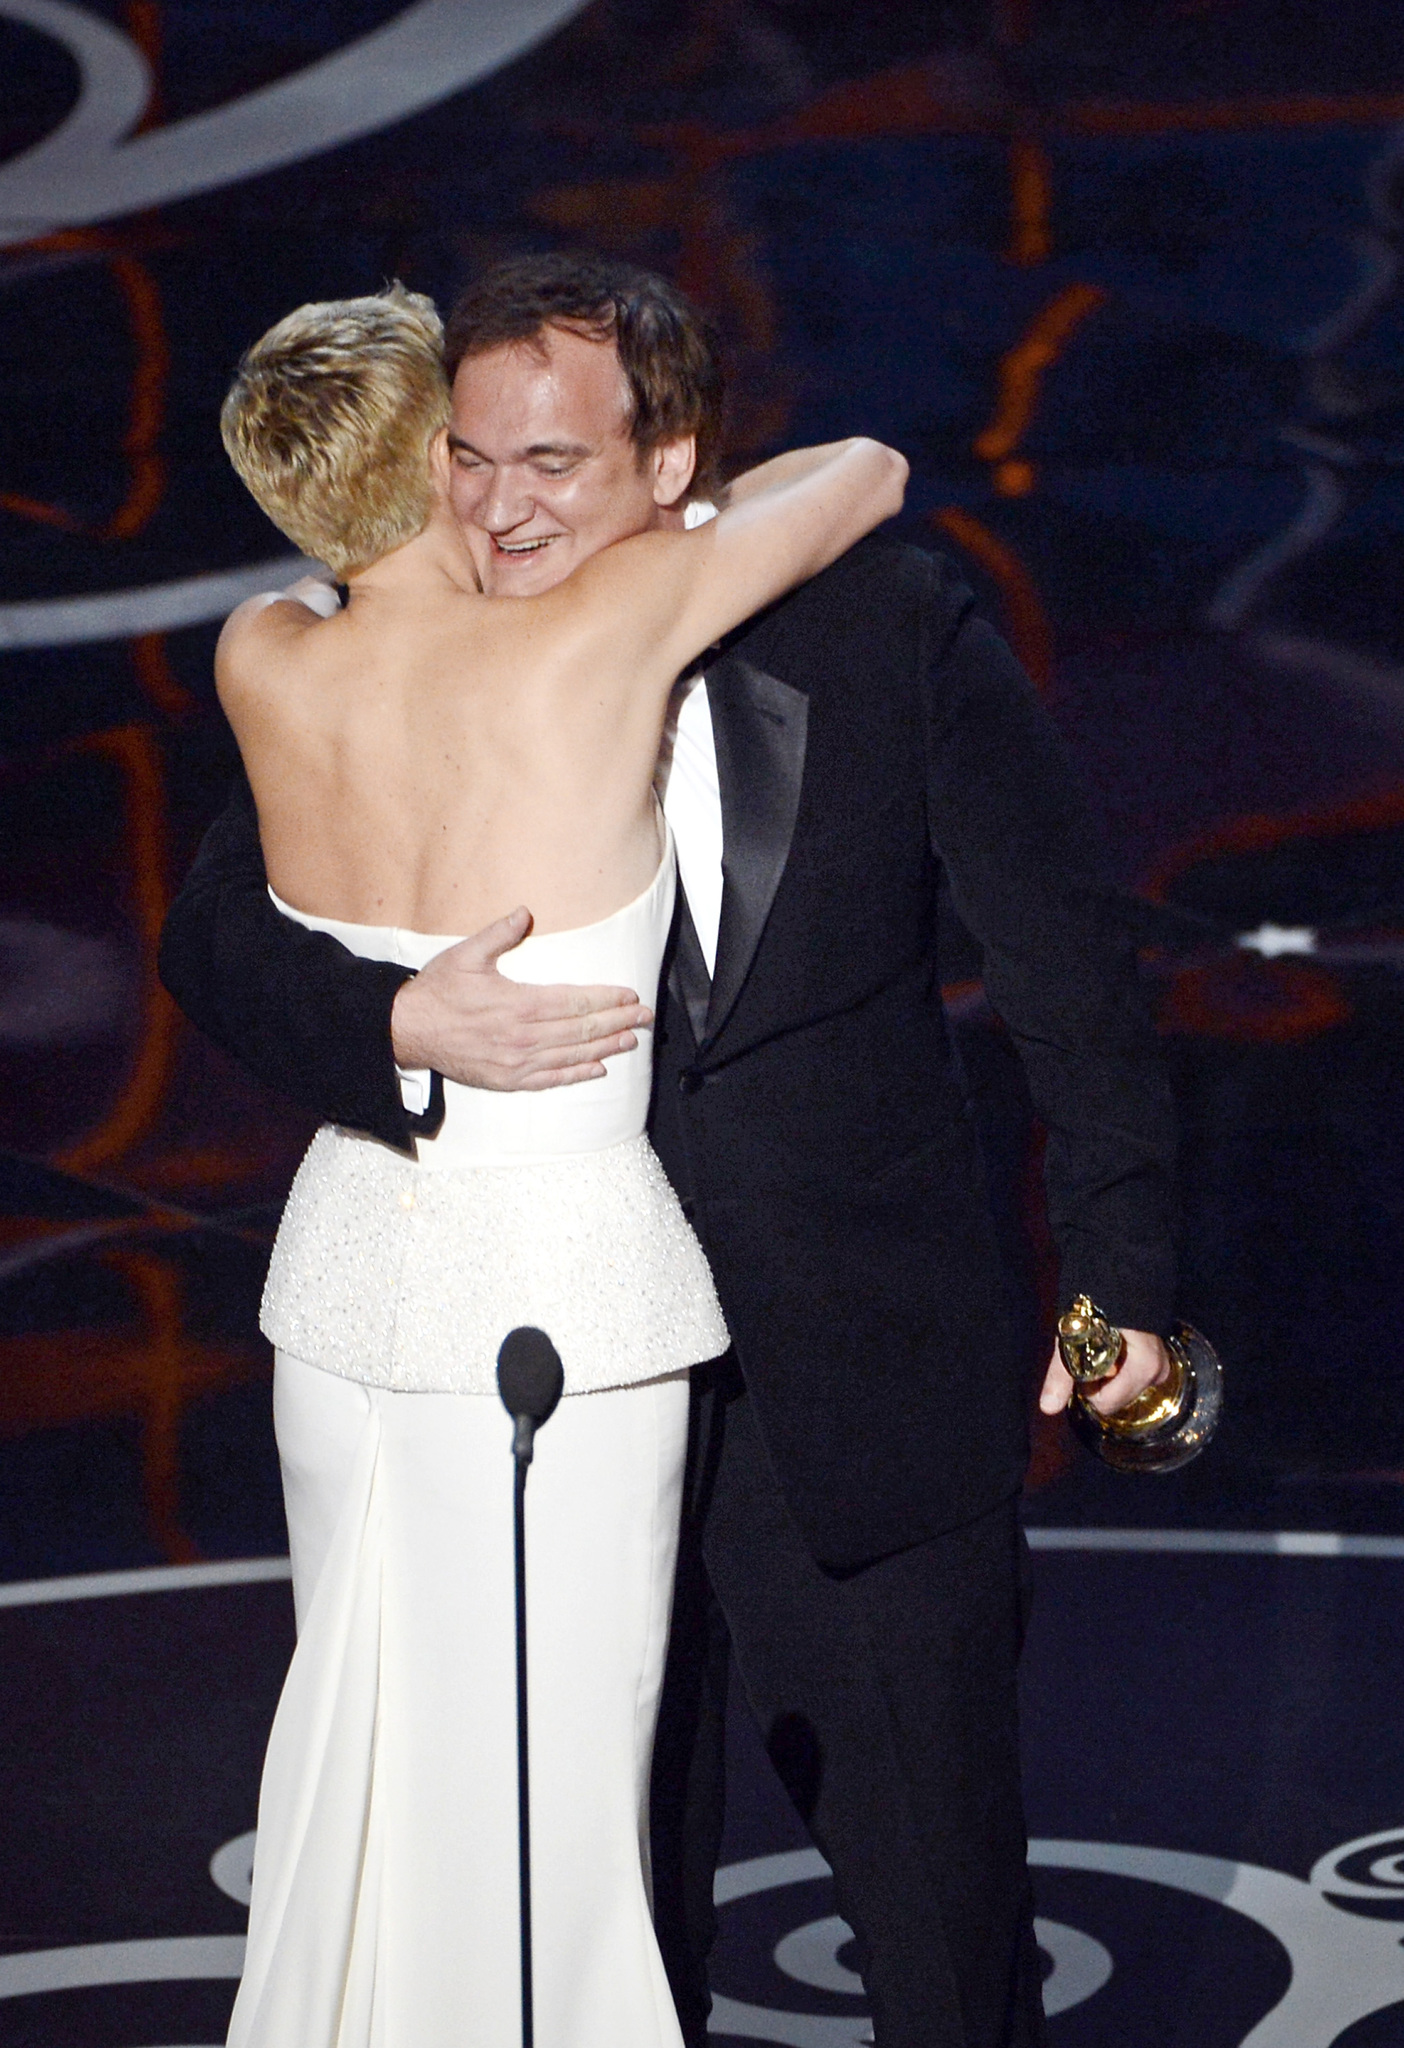 Quentin Tarantino and Charlize Theron at event of The Oscars (2013)